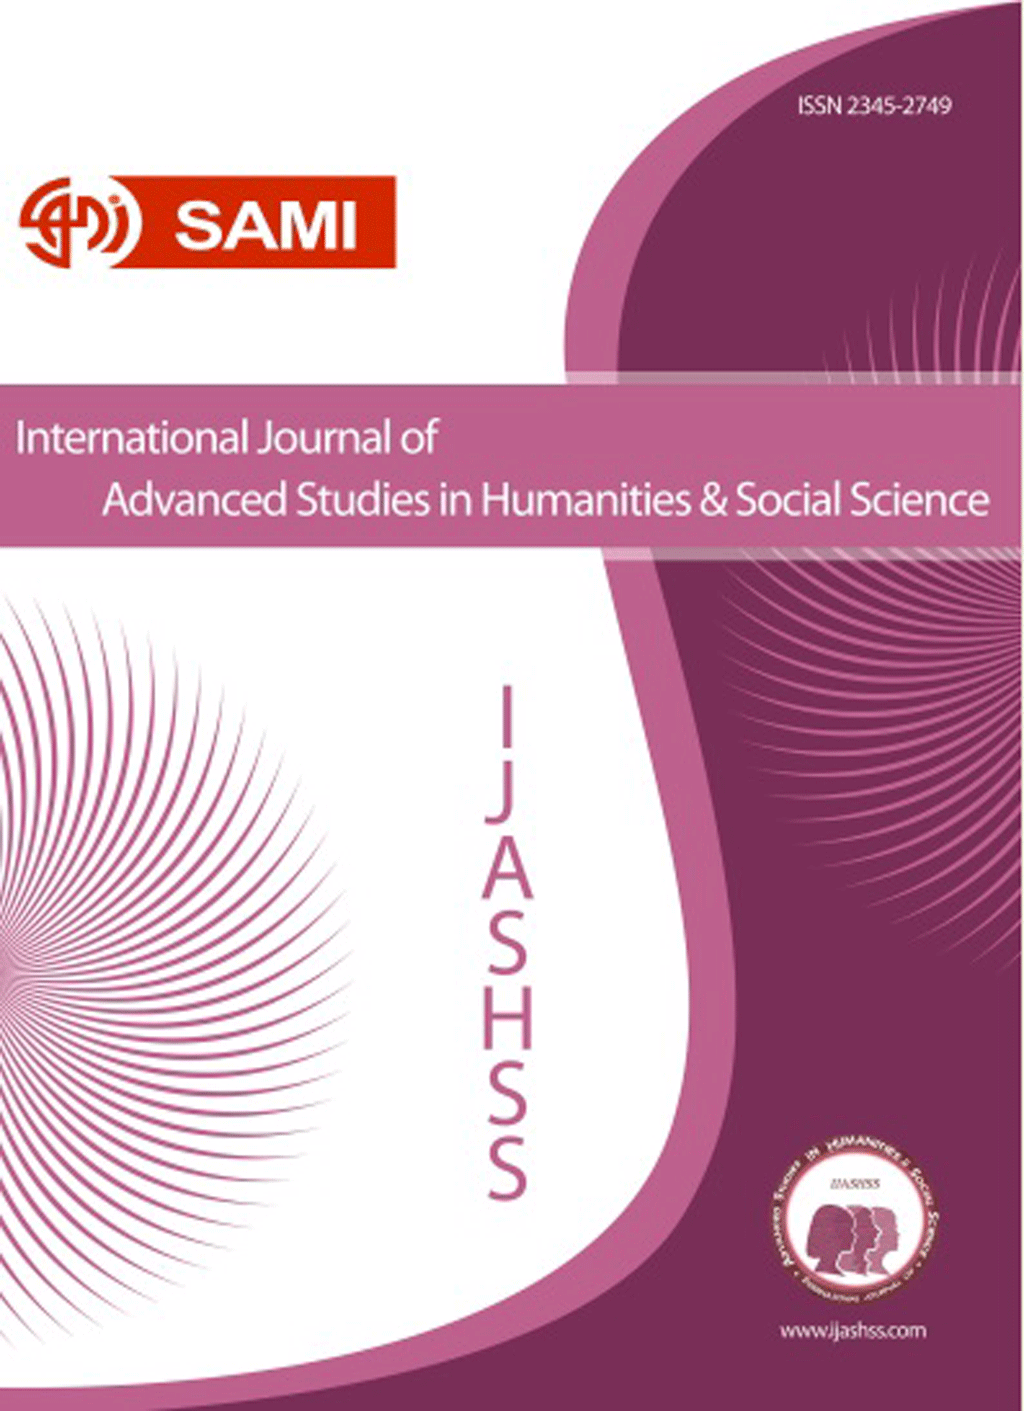 International Journal of Advanced Studies in Humanities and Social Science - March 2012, Volume 1 - Issue 2